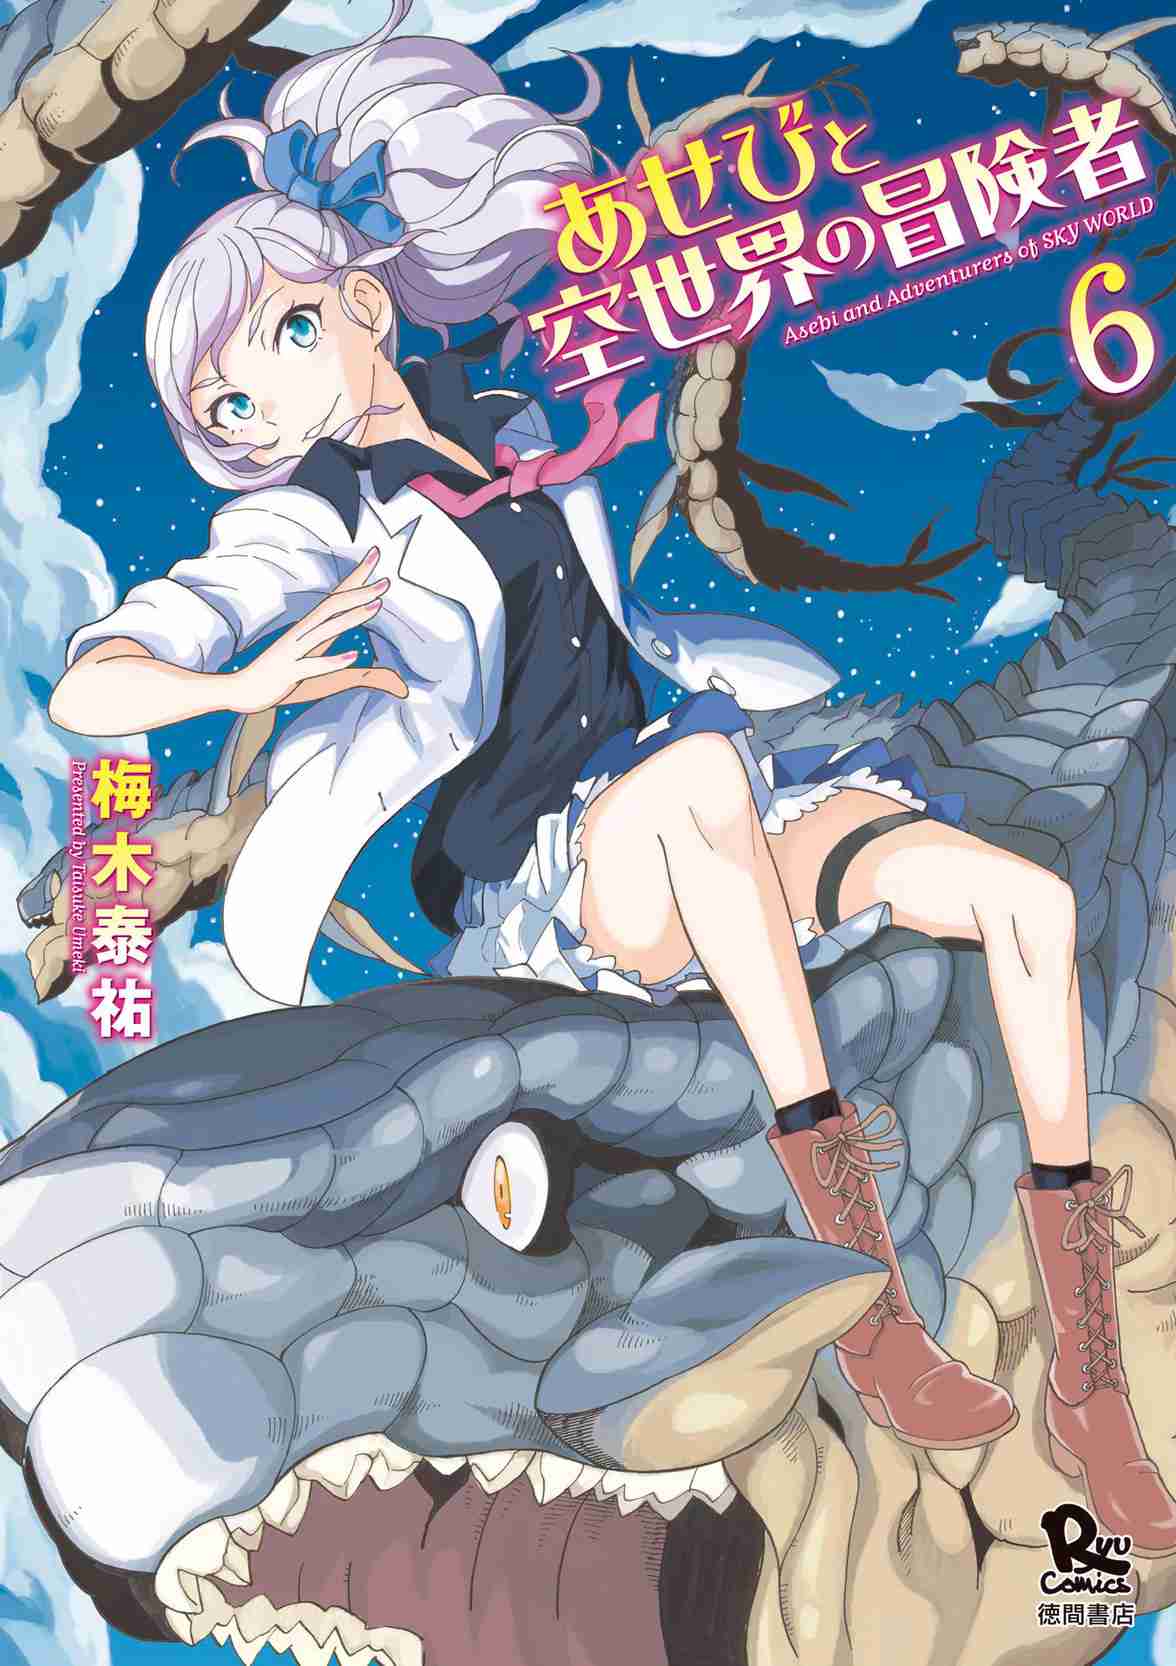 Asebi and Adventurers of Sky World Vol. 6 Ch. 26 Ancient ship and mysterious Licorice